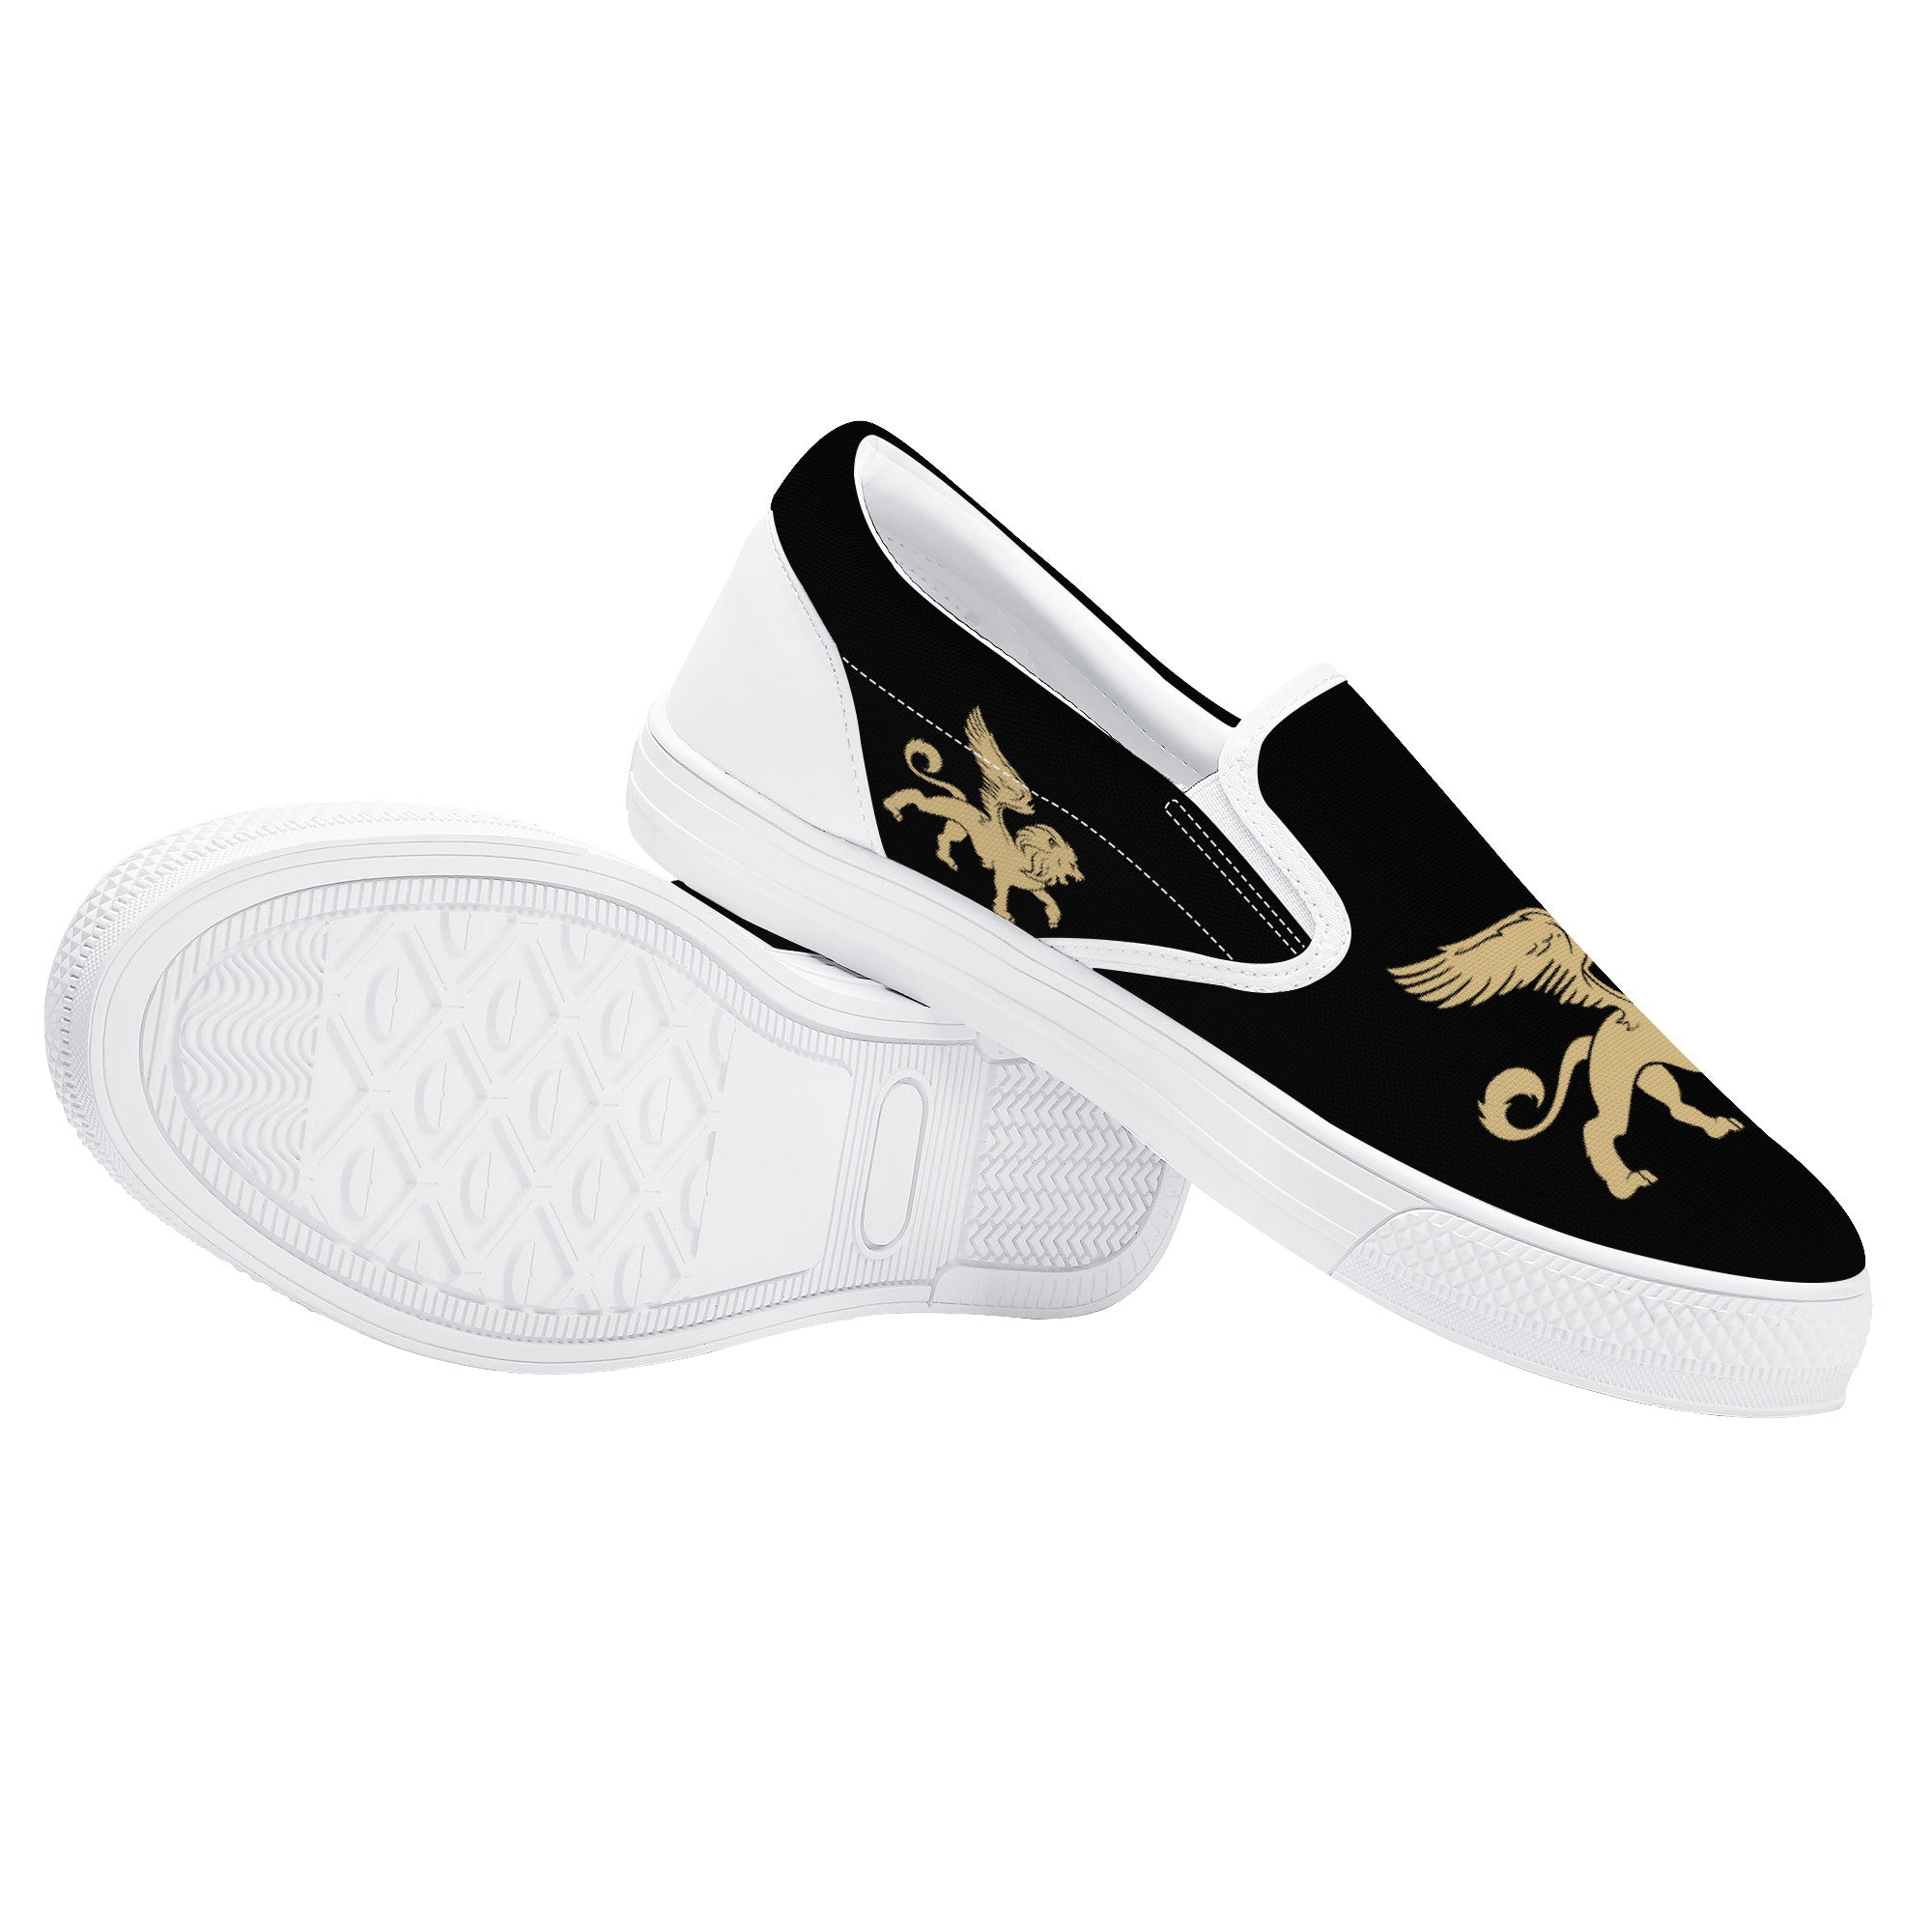 Gold Lion V2 Slip-on Shoes | Low Top Customized | Shoe Zero